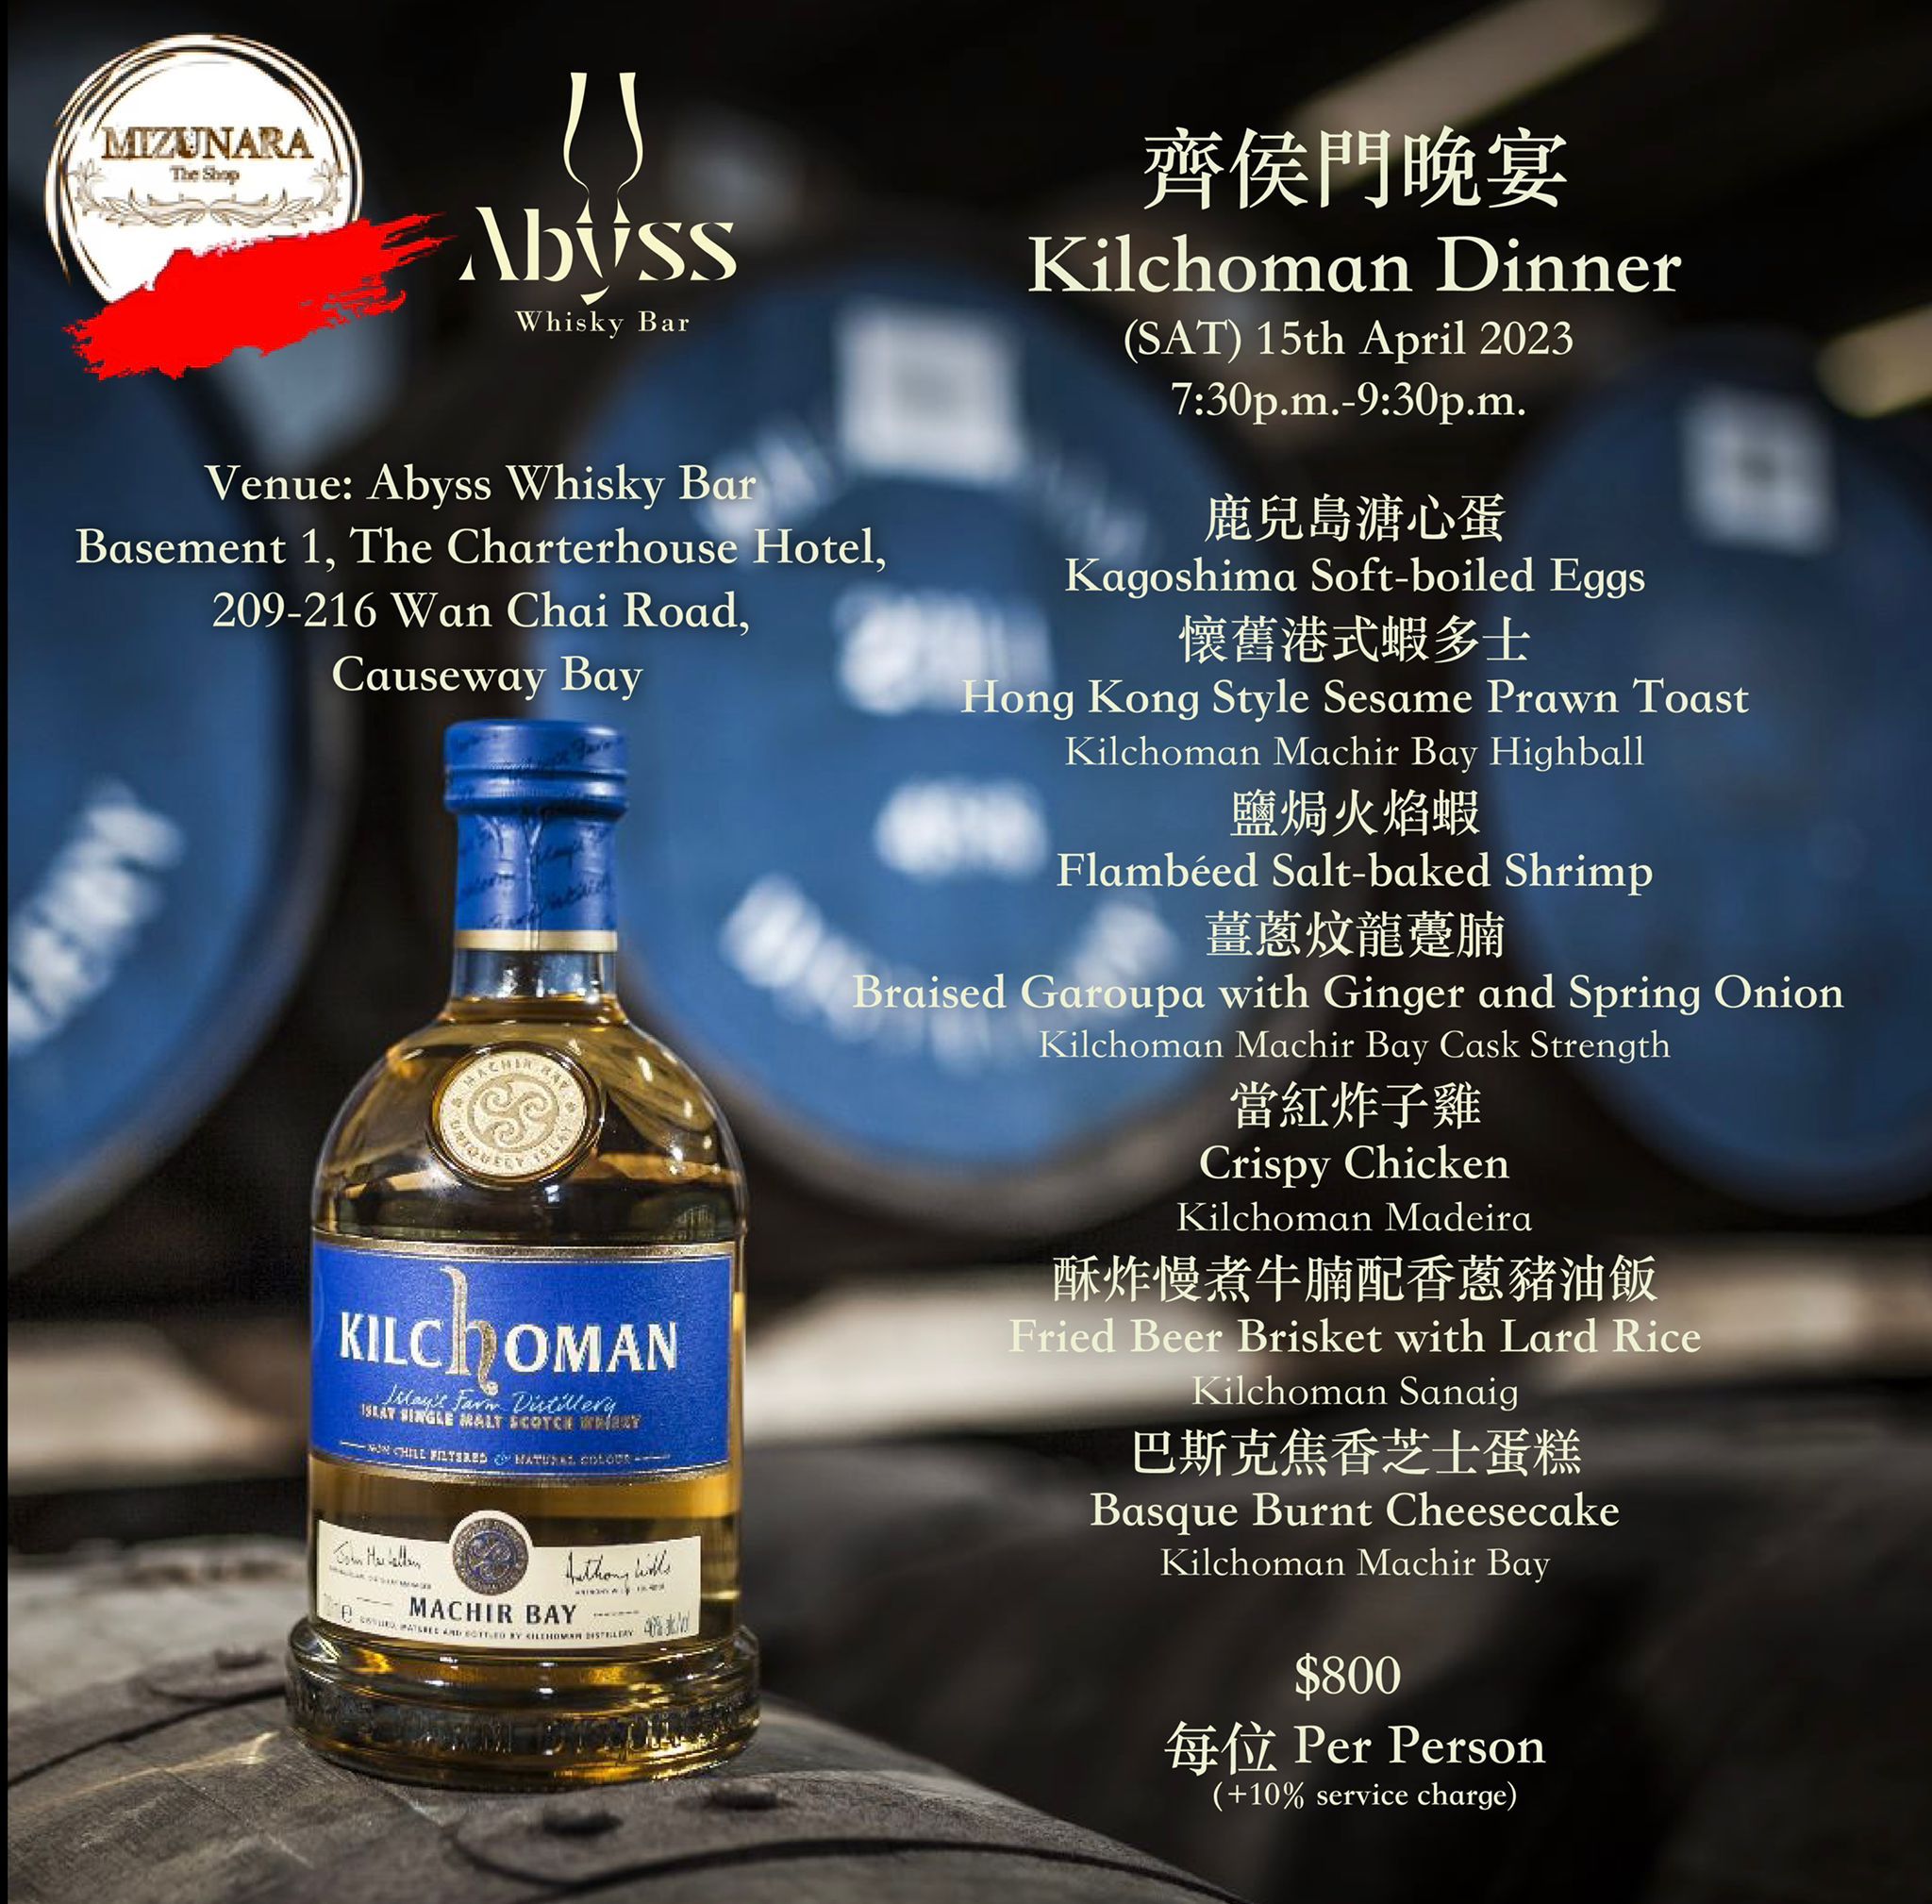 Abyss Whisky Bar "7 Course Chinese Food Pairing x Kilchoman Islay Whisky" with Peter Wills on April 15th 2023 @ 7:30 p.m. - 0